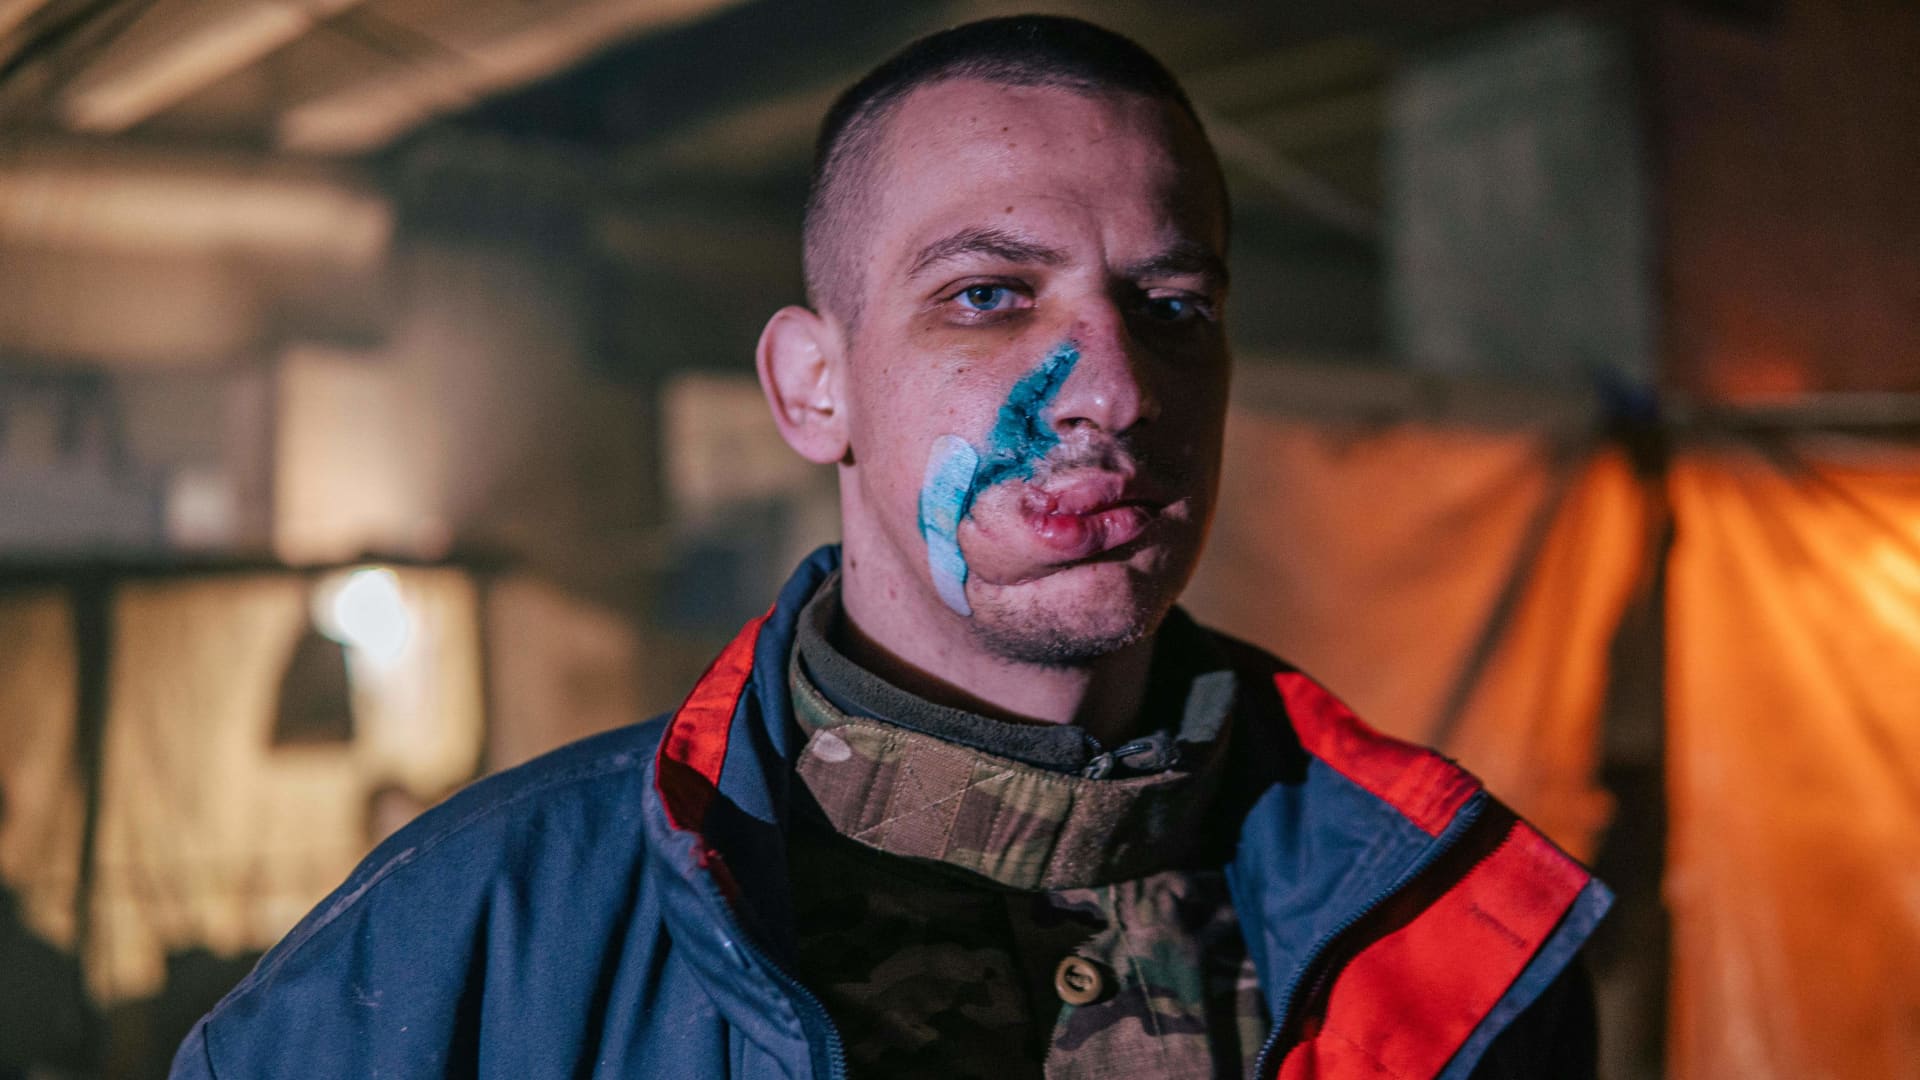 This photo released on May 10, 2022 by the Azov regiment shows an injured Ukrainian serviceman inside the Azovstal iron and steel works factory in eastern Mariupol, Ukraine, amid the Russian invasion.